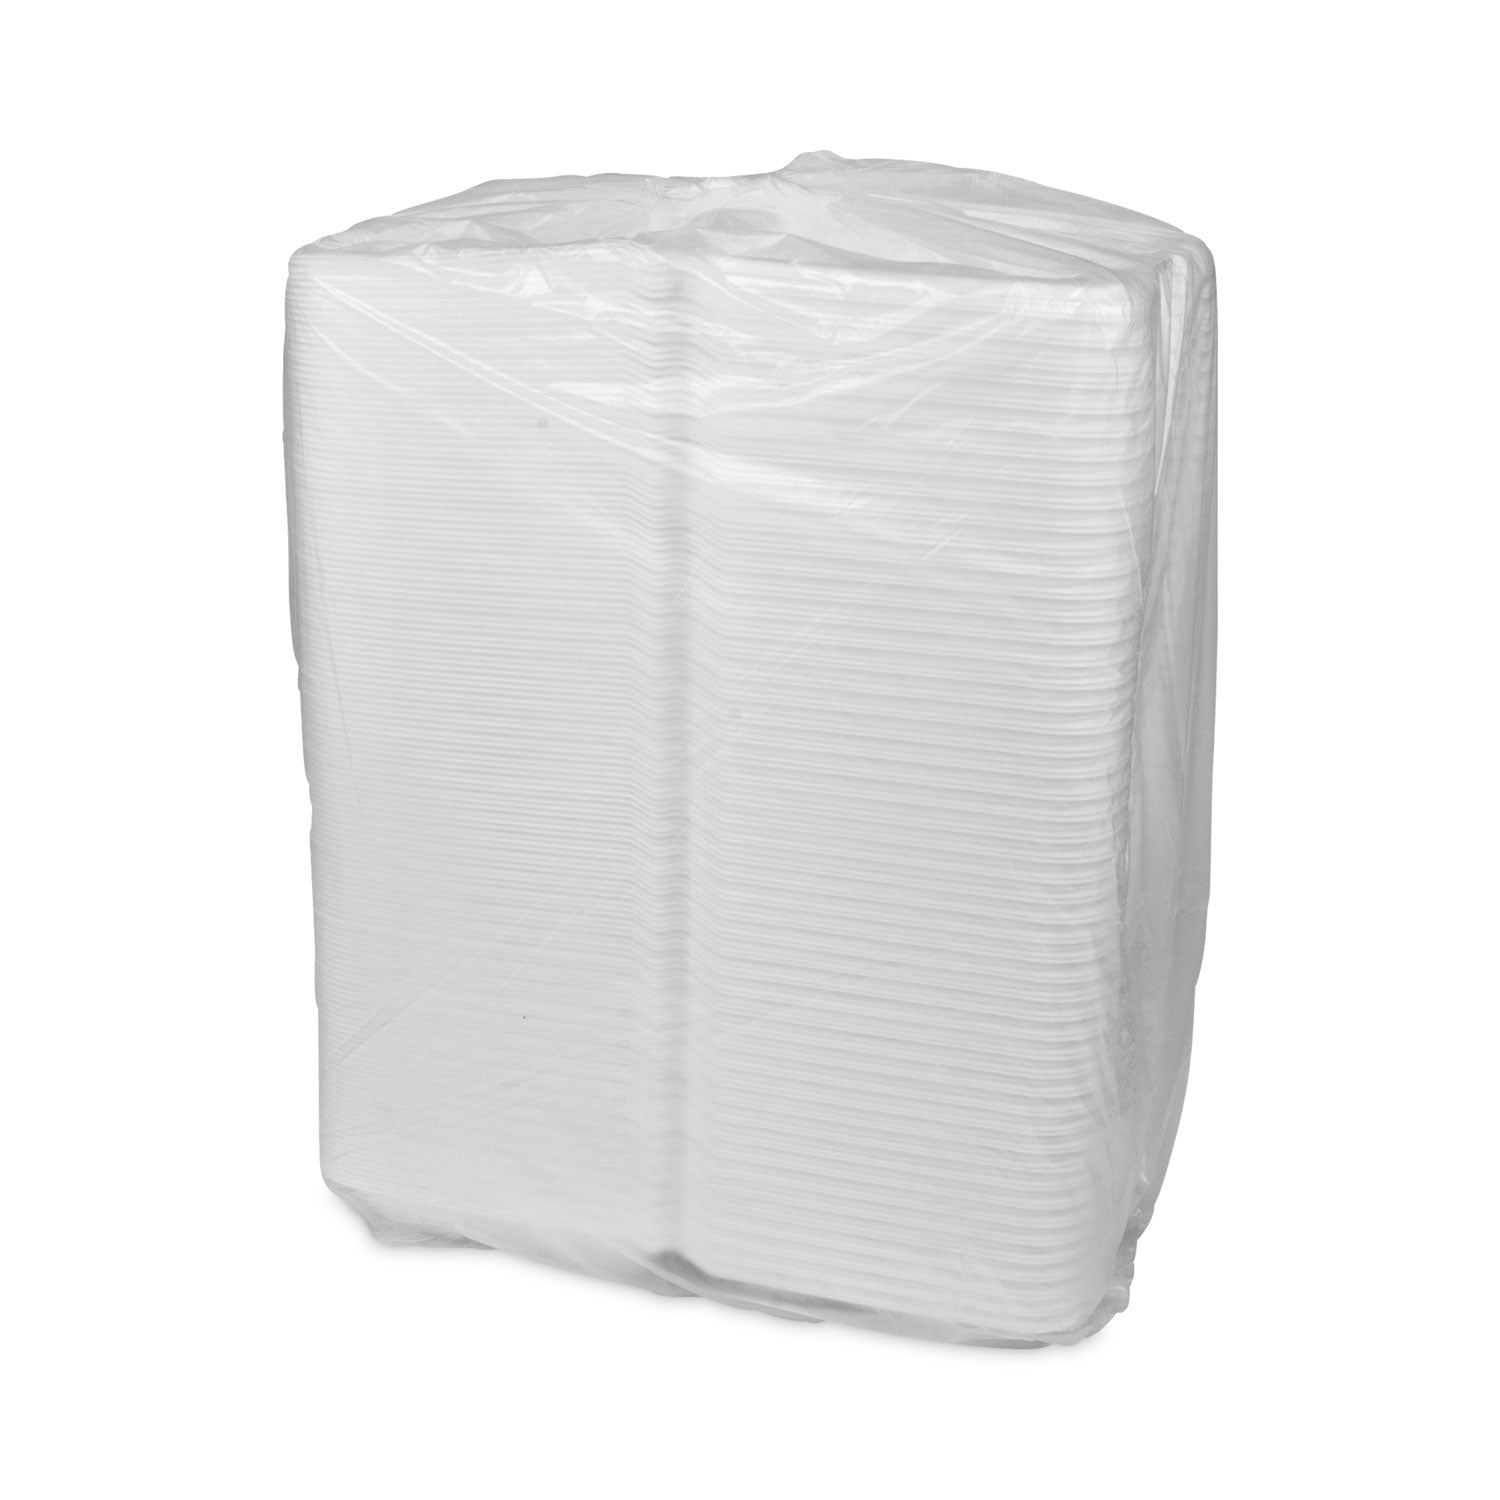 vented-foam-hinged-lid-container-dual-tab-lock-economy-913-x-9-x-325-white-150-carton_pctytd19901econ - 3